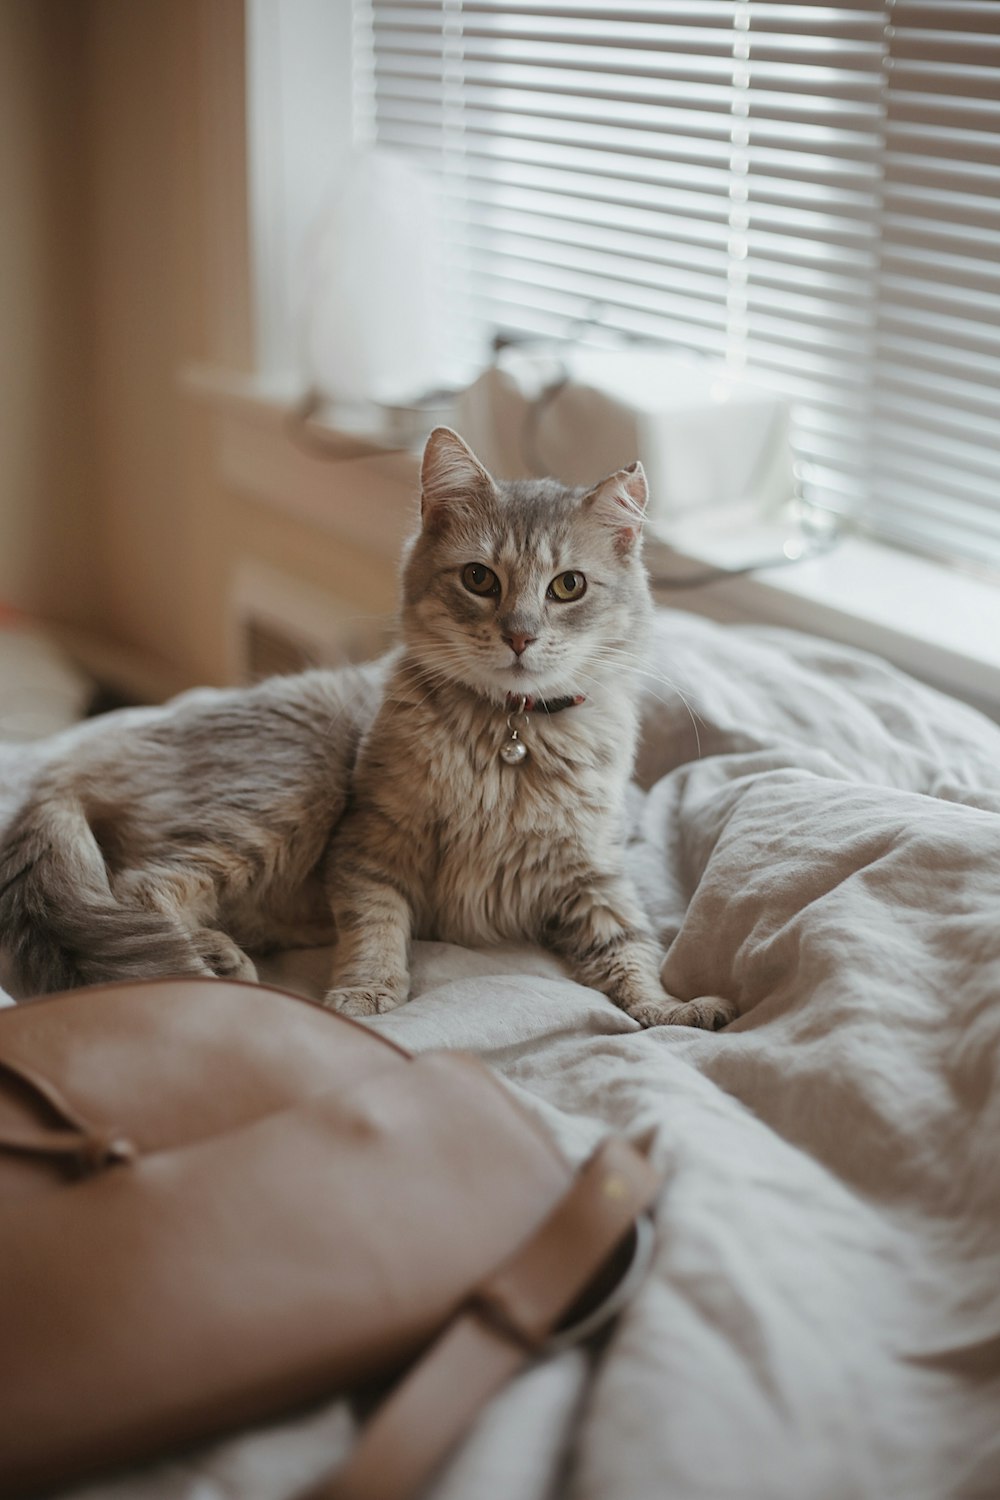 a cat sitting on a bed next to a purse